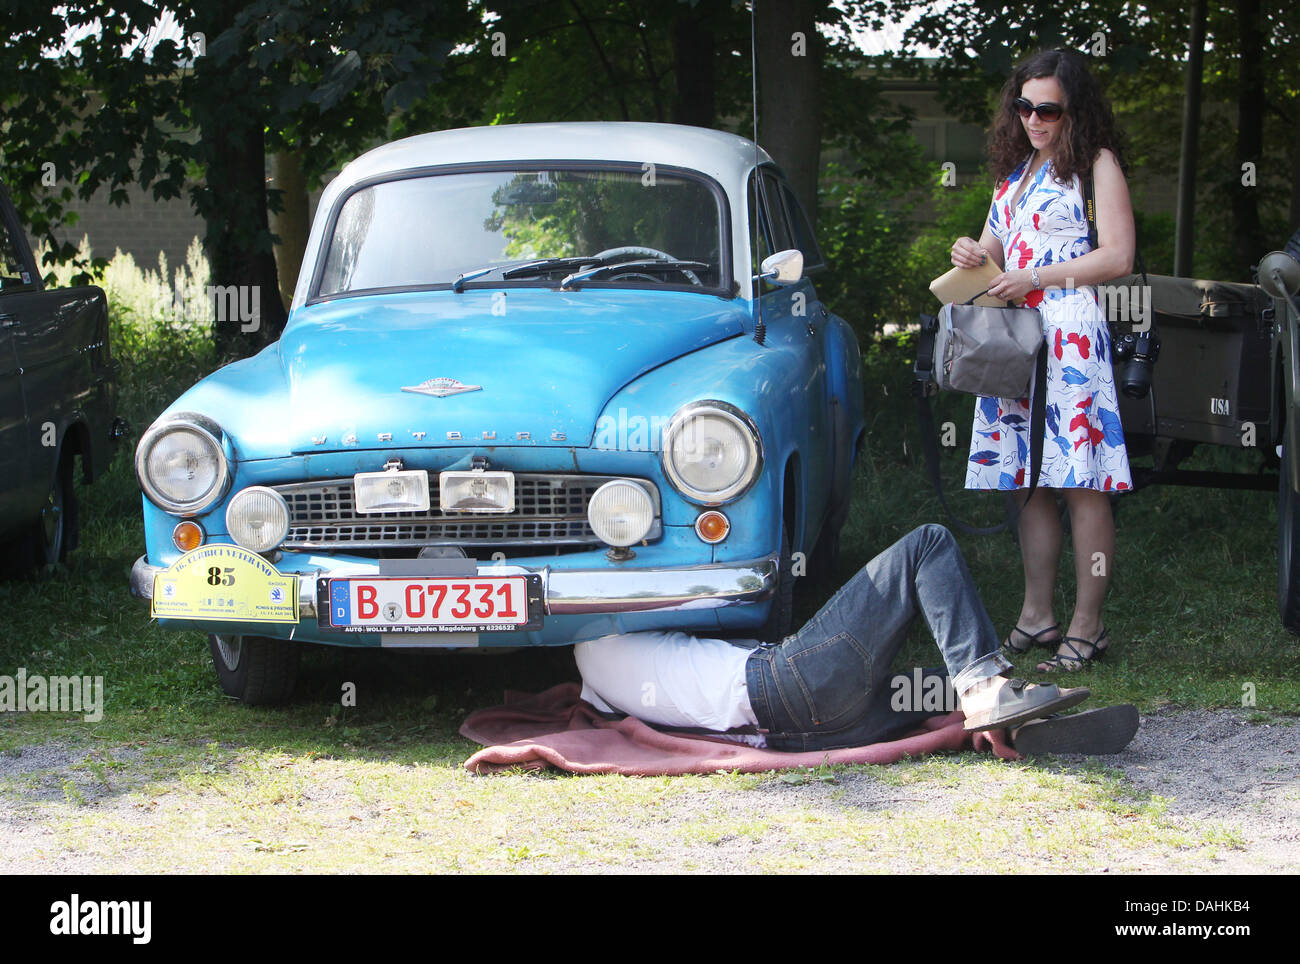 A Wartburg 311 from 1953 is repaired during the 'Curbici-Veterano' classic car rally in Zoerbig, Germany, 13 July 2013. The classic vehichle show takes place on 13 and 14 July 2013. Photo: SEBASTIAN WILLNOW Stock Photo